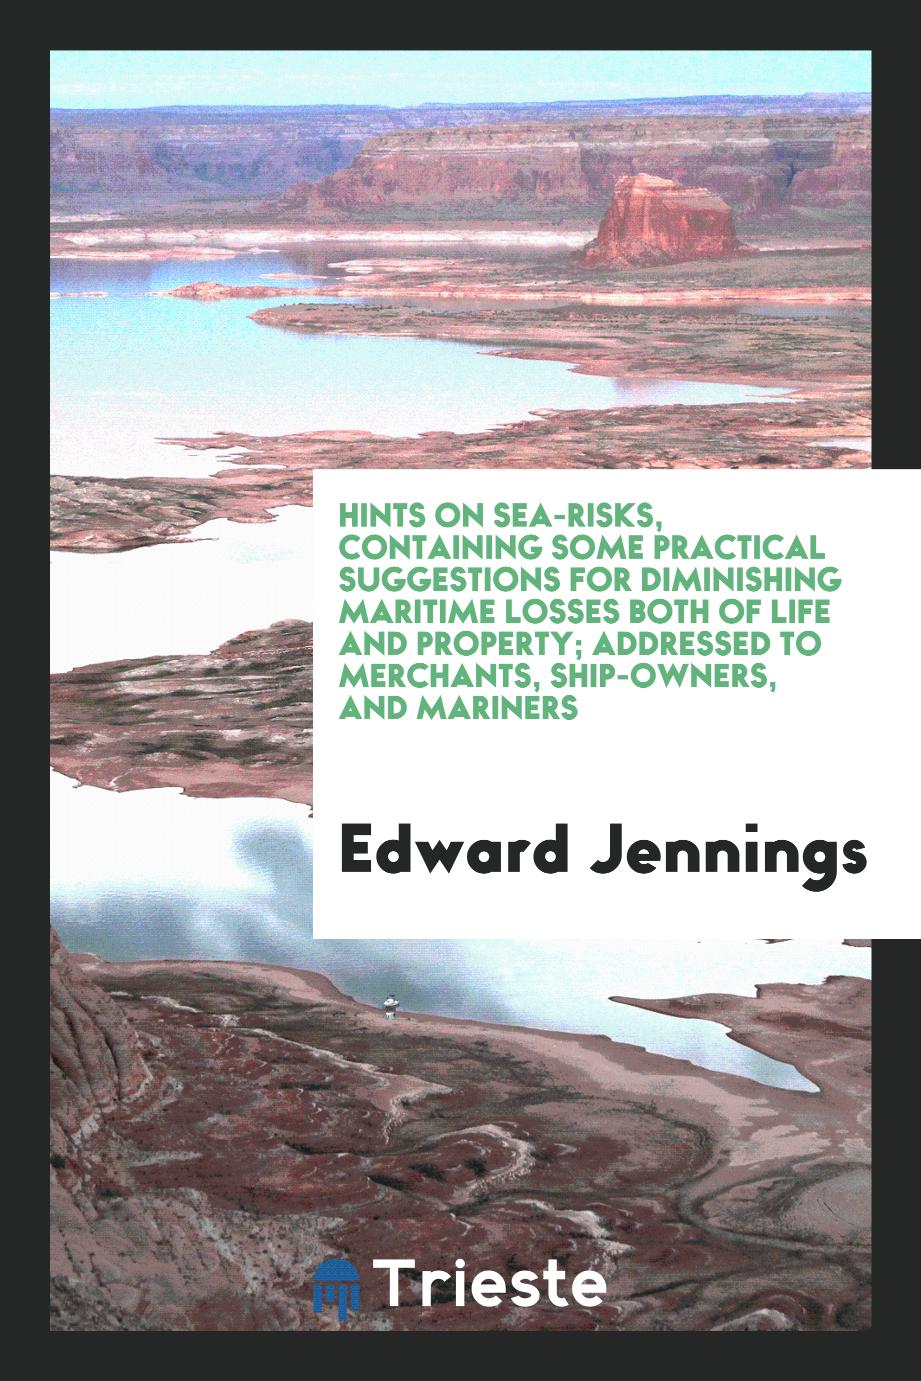 Hints on Sea-Risks, Containing Some Practical Suggestions for Diminishing Maritime Losses Both of Life and Property; Addressed to Merchants, Ship-Owners, and Mariners